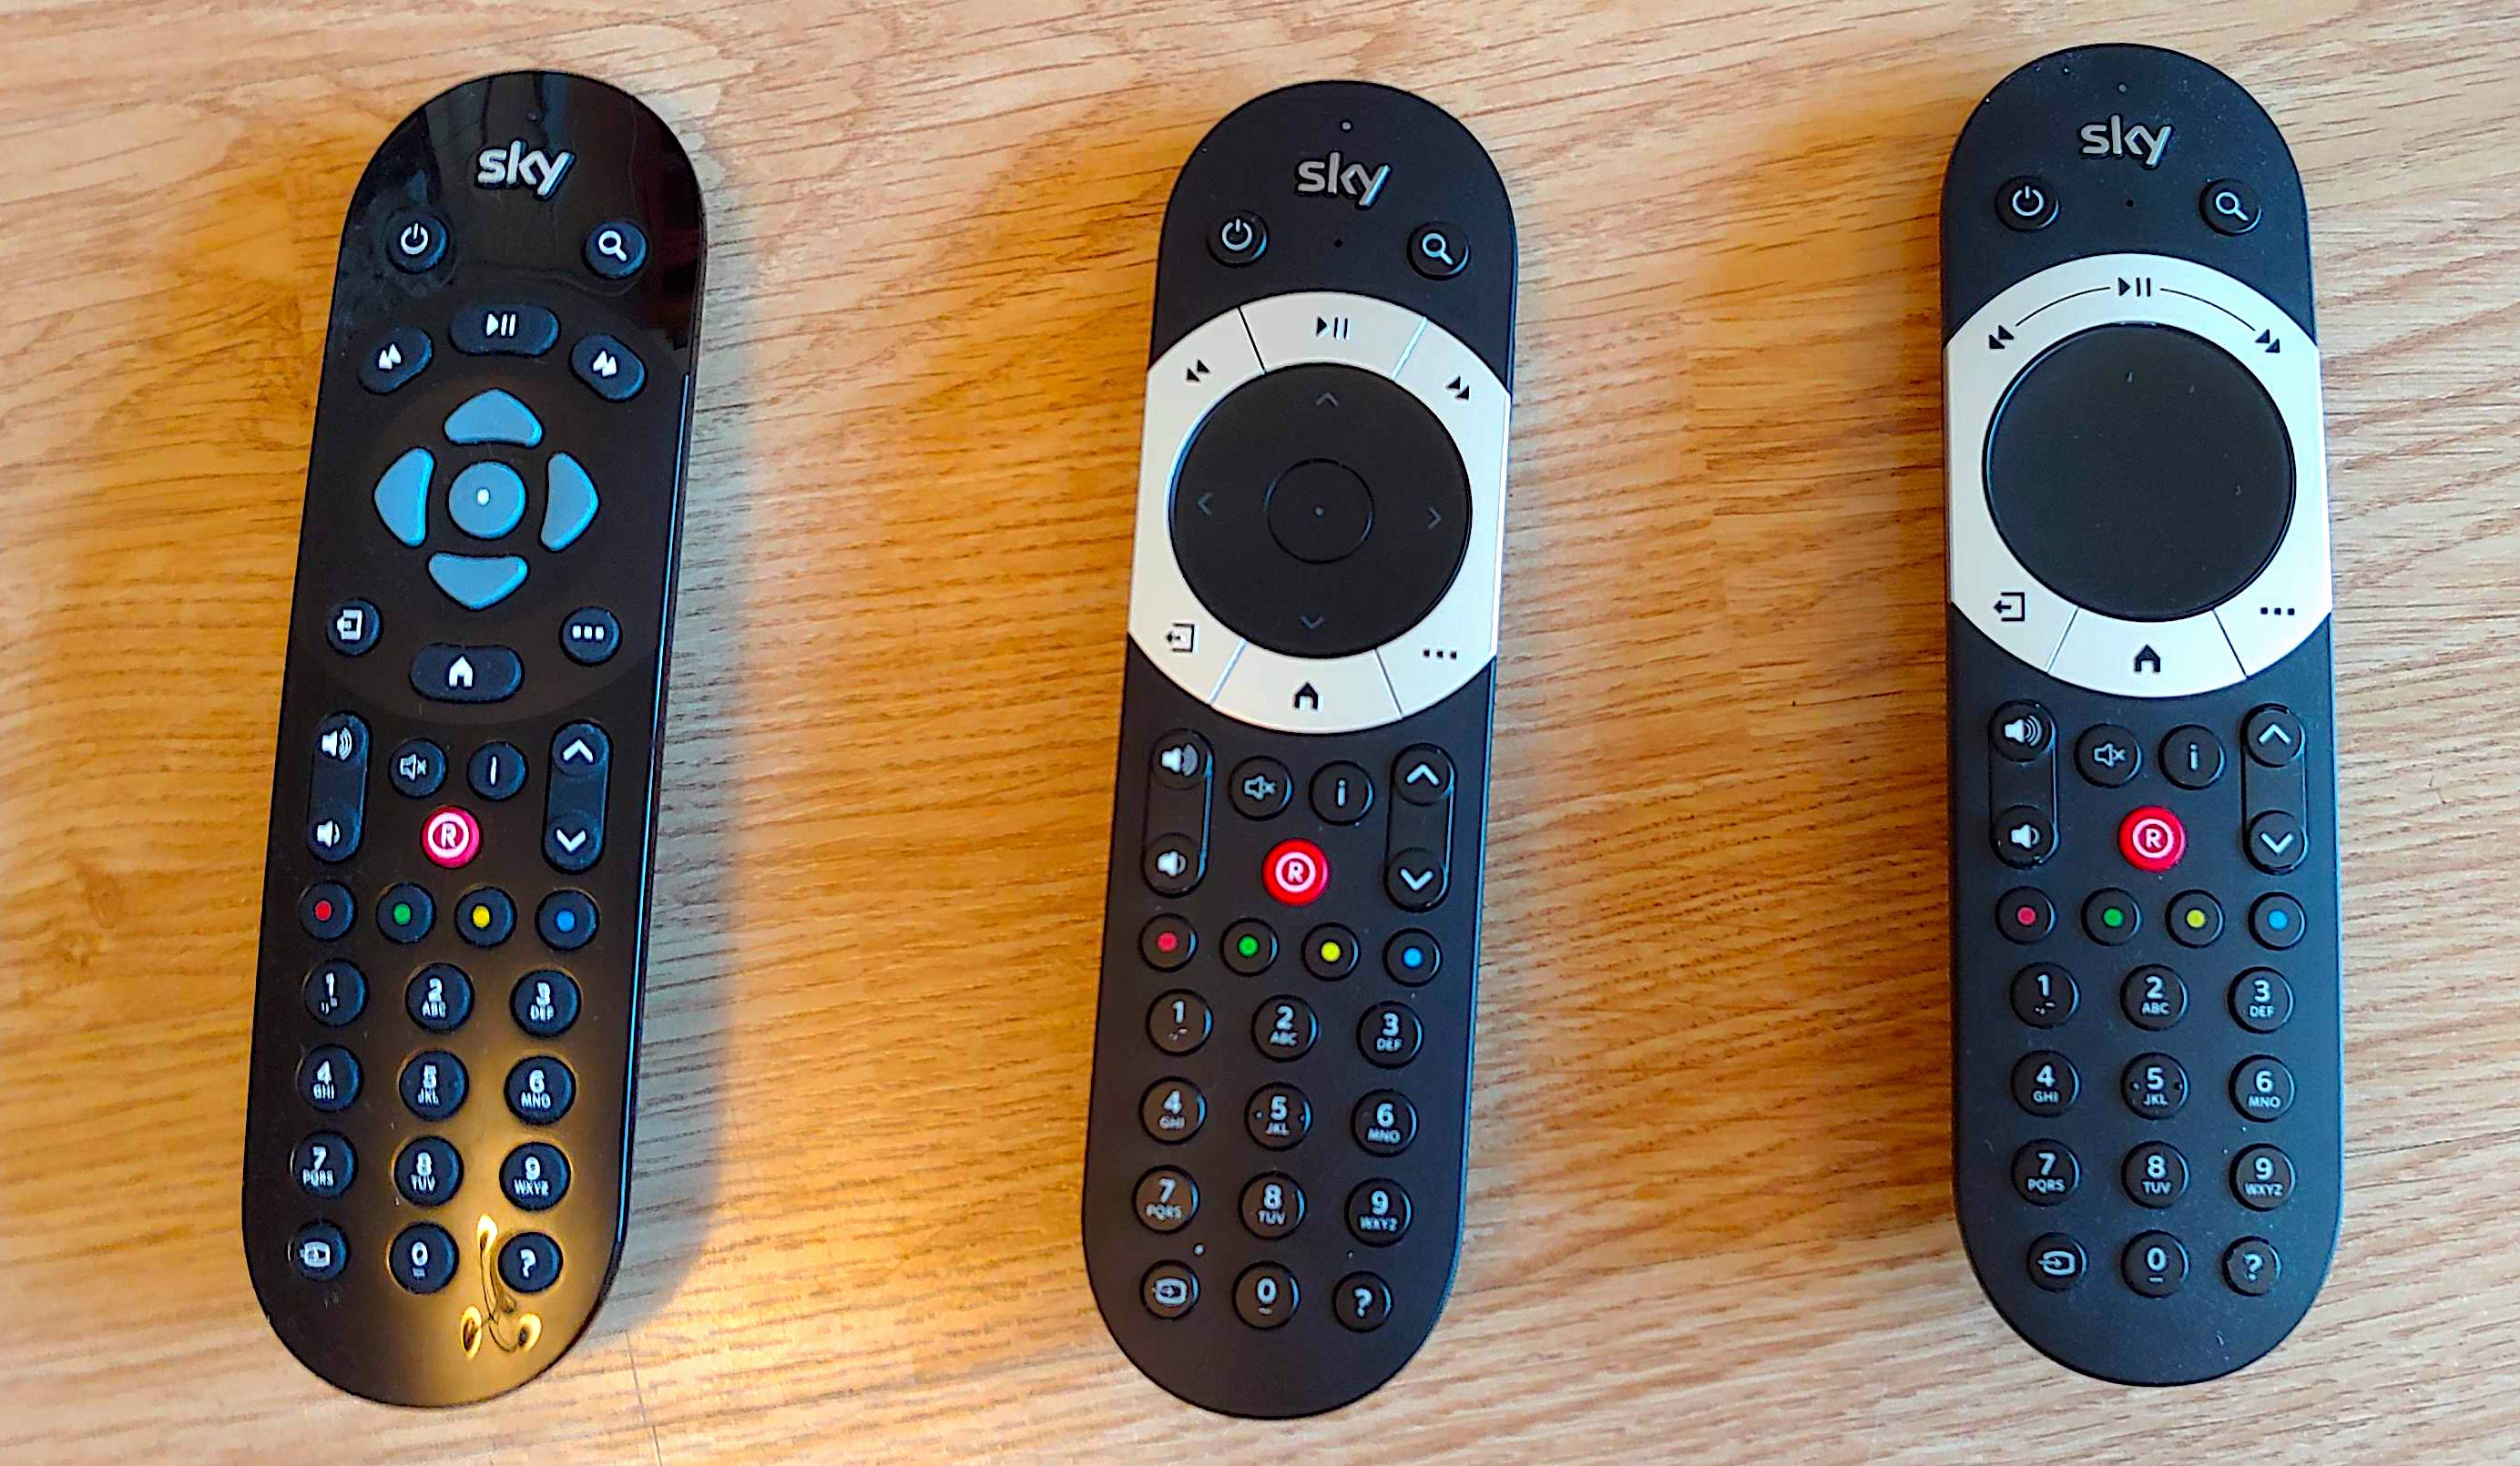 All three versions of the sky q remote on a wooden surface